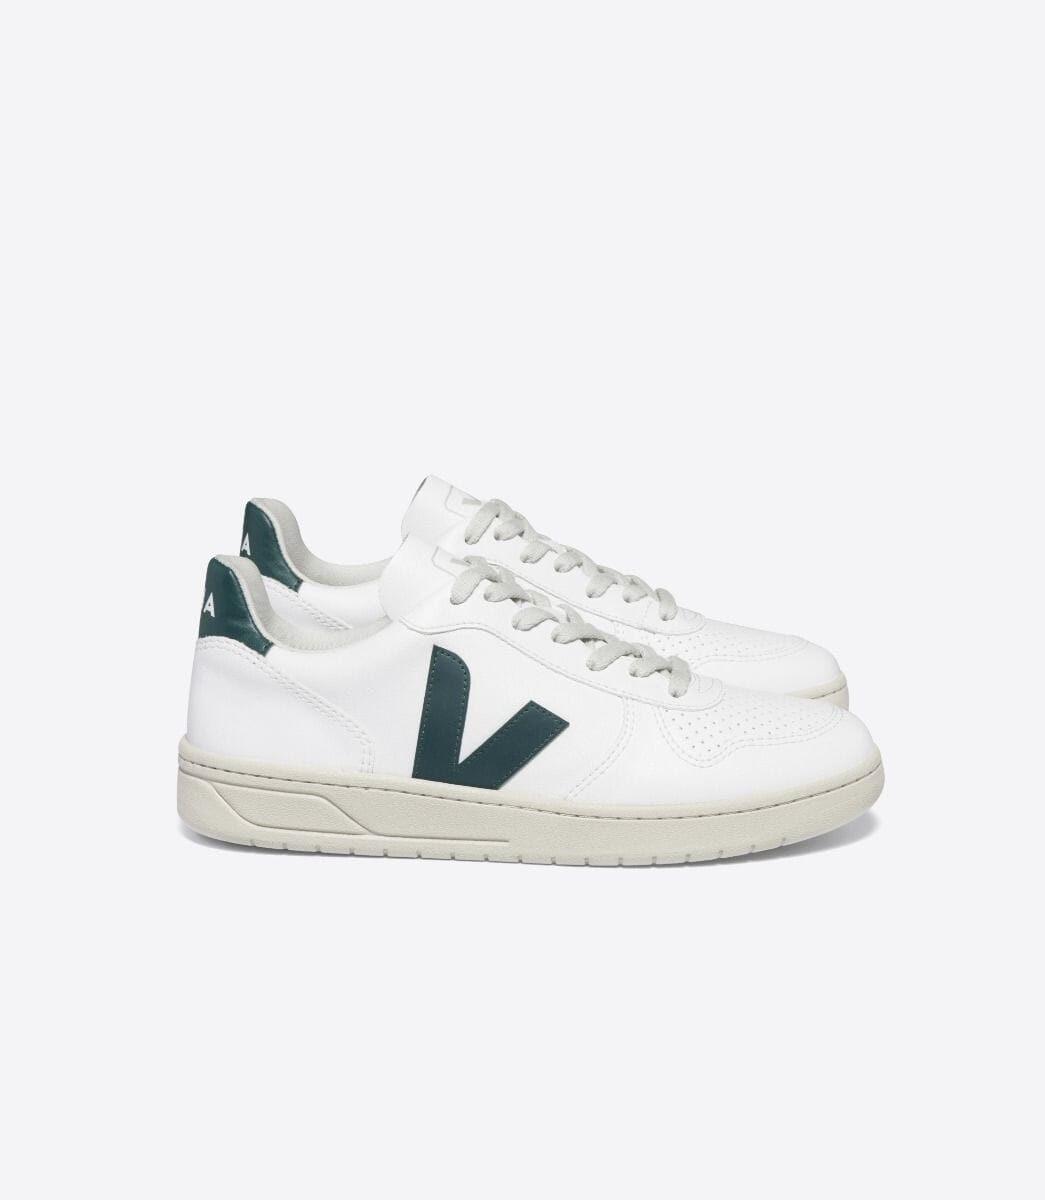 Veja M's V-10 CWL - Cotton Worked as Leather White Brittany 1 Shoes